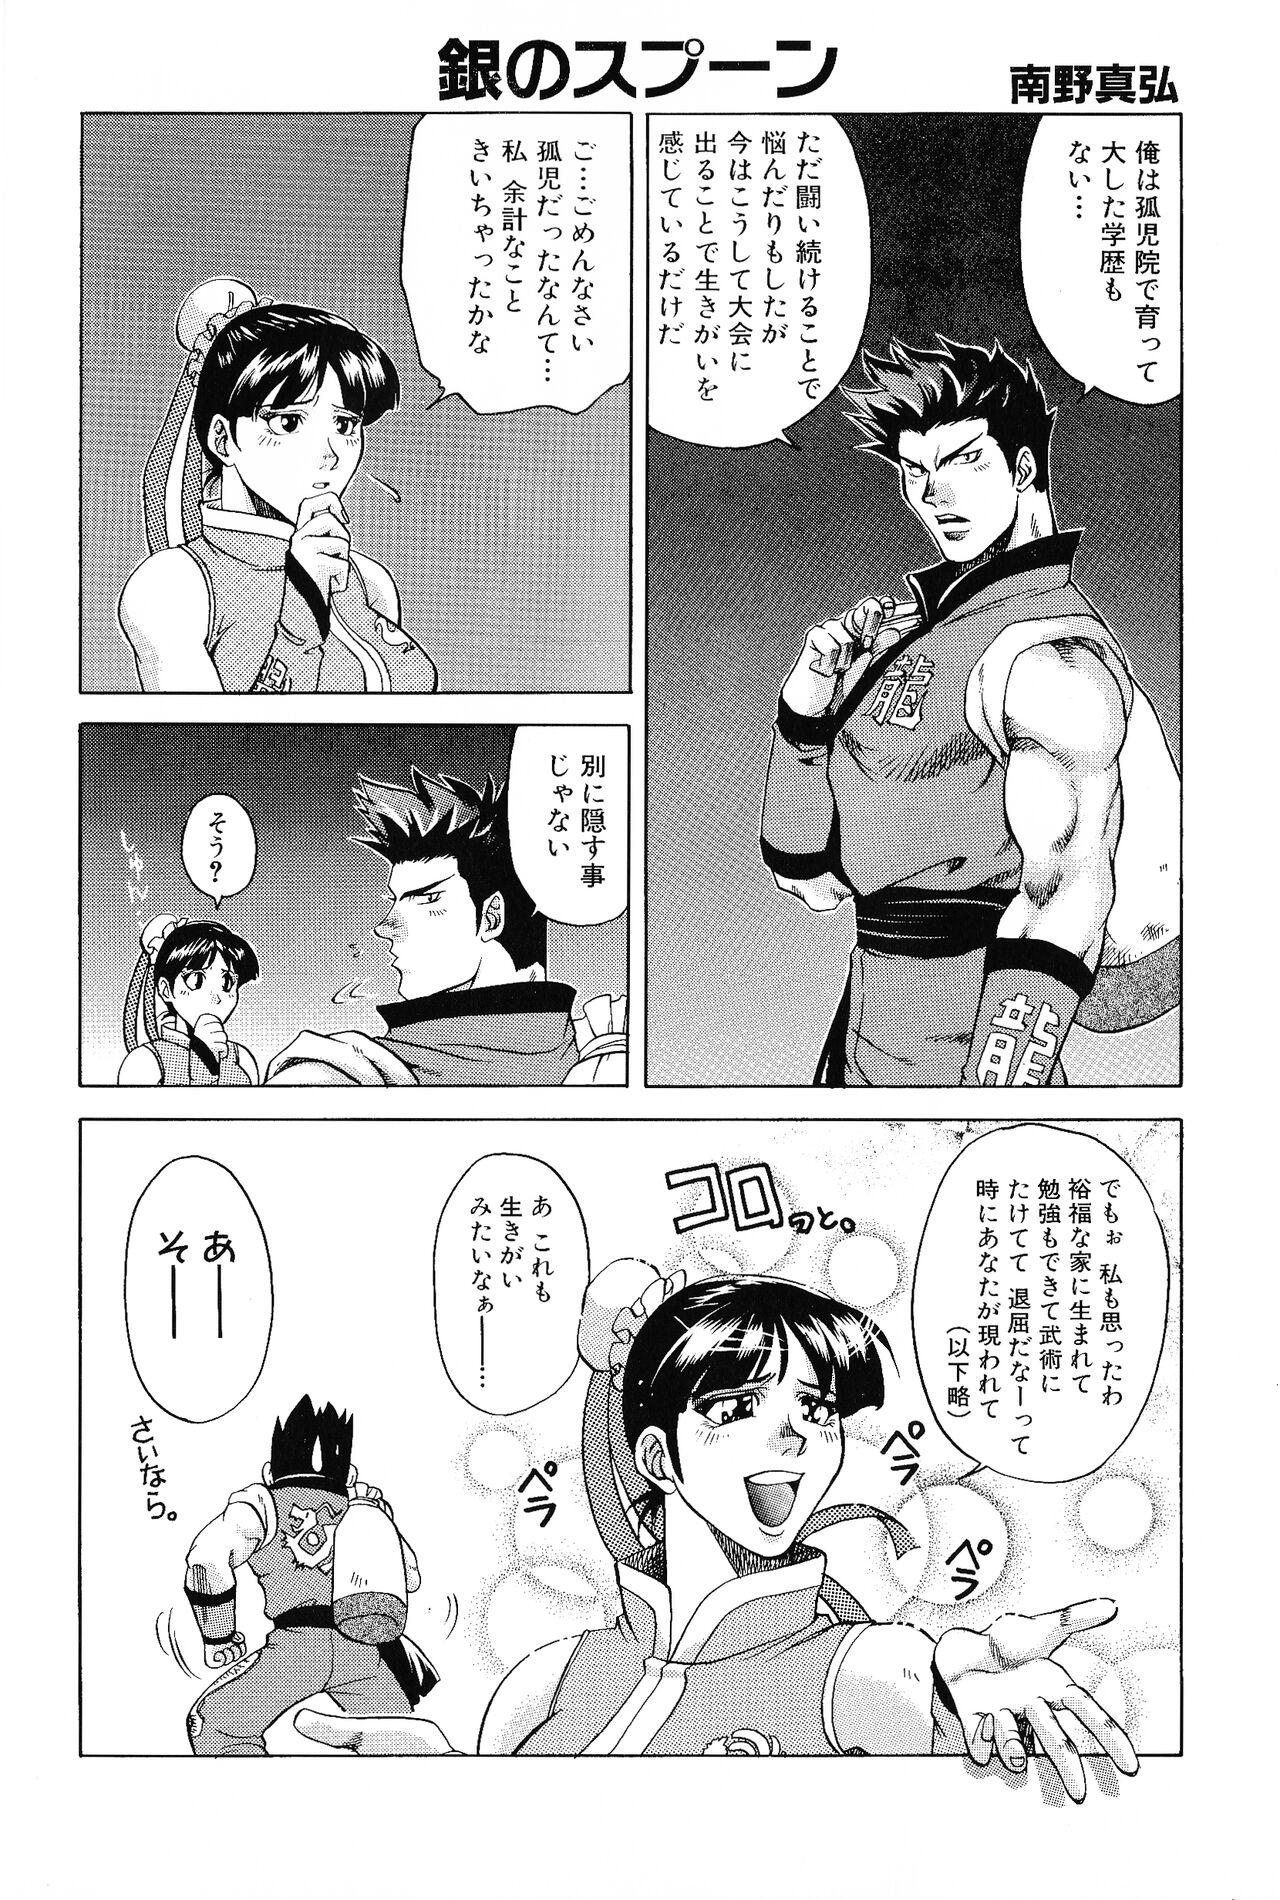 Siririca Game Gag 1P Comic: Dead or Alive Edition - Dead or alive All Natural - Page 10